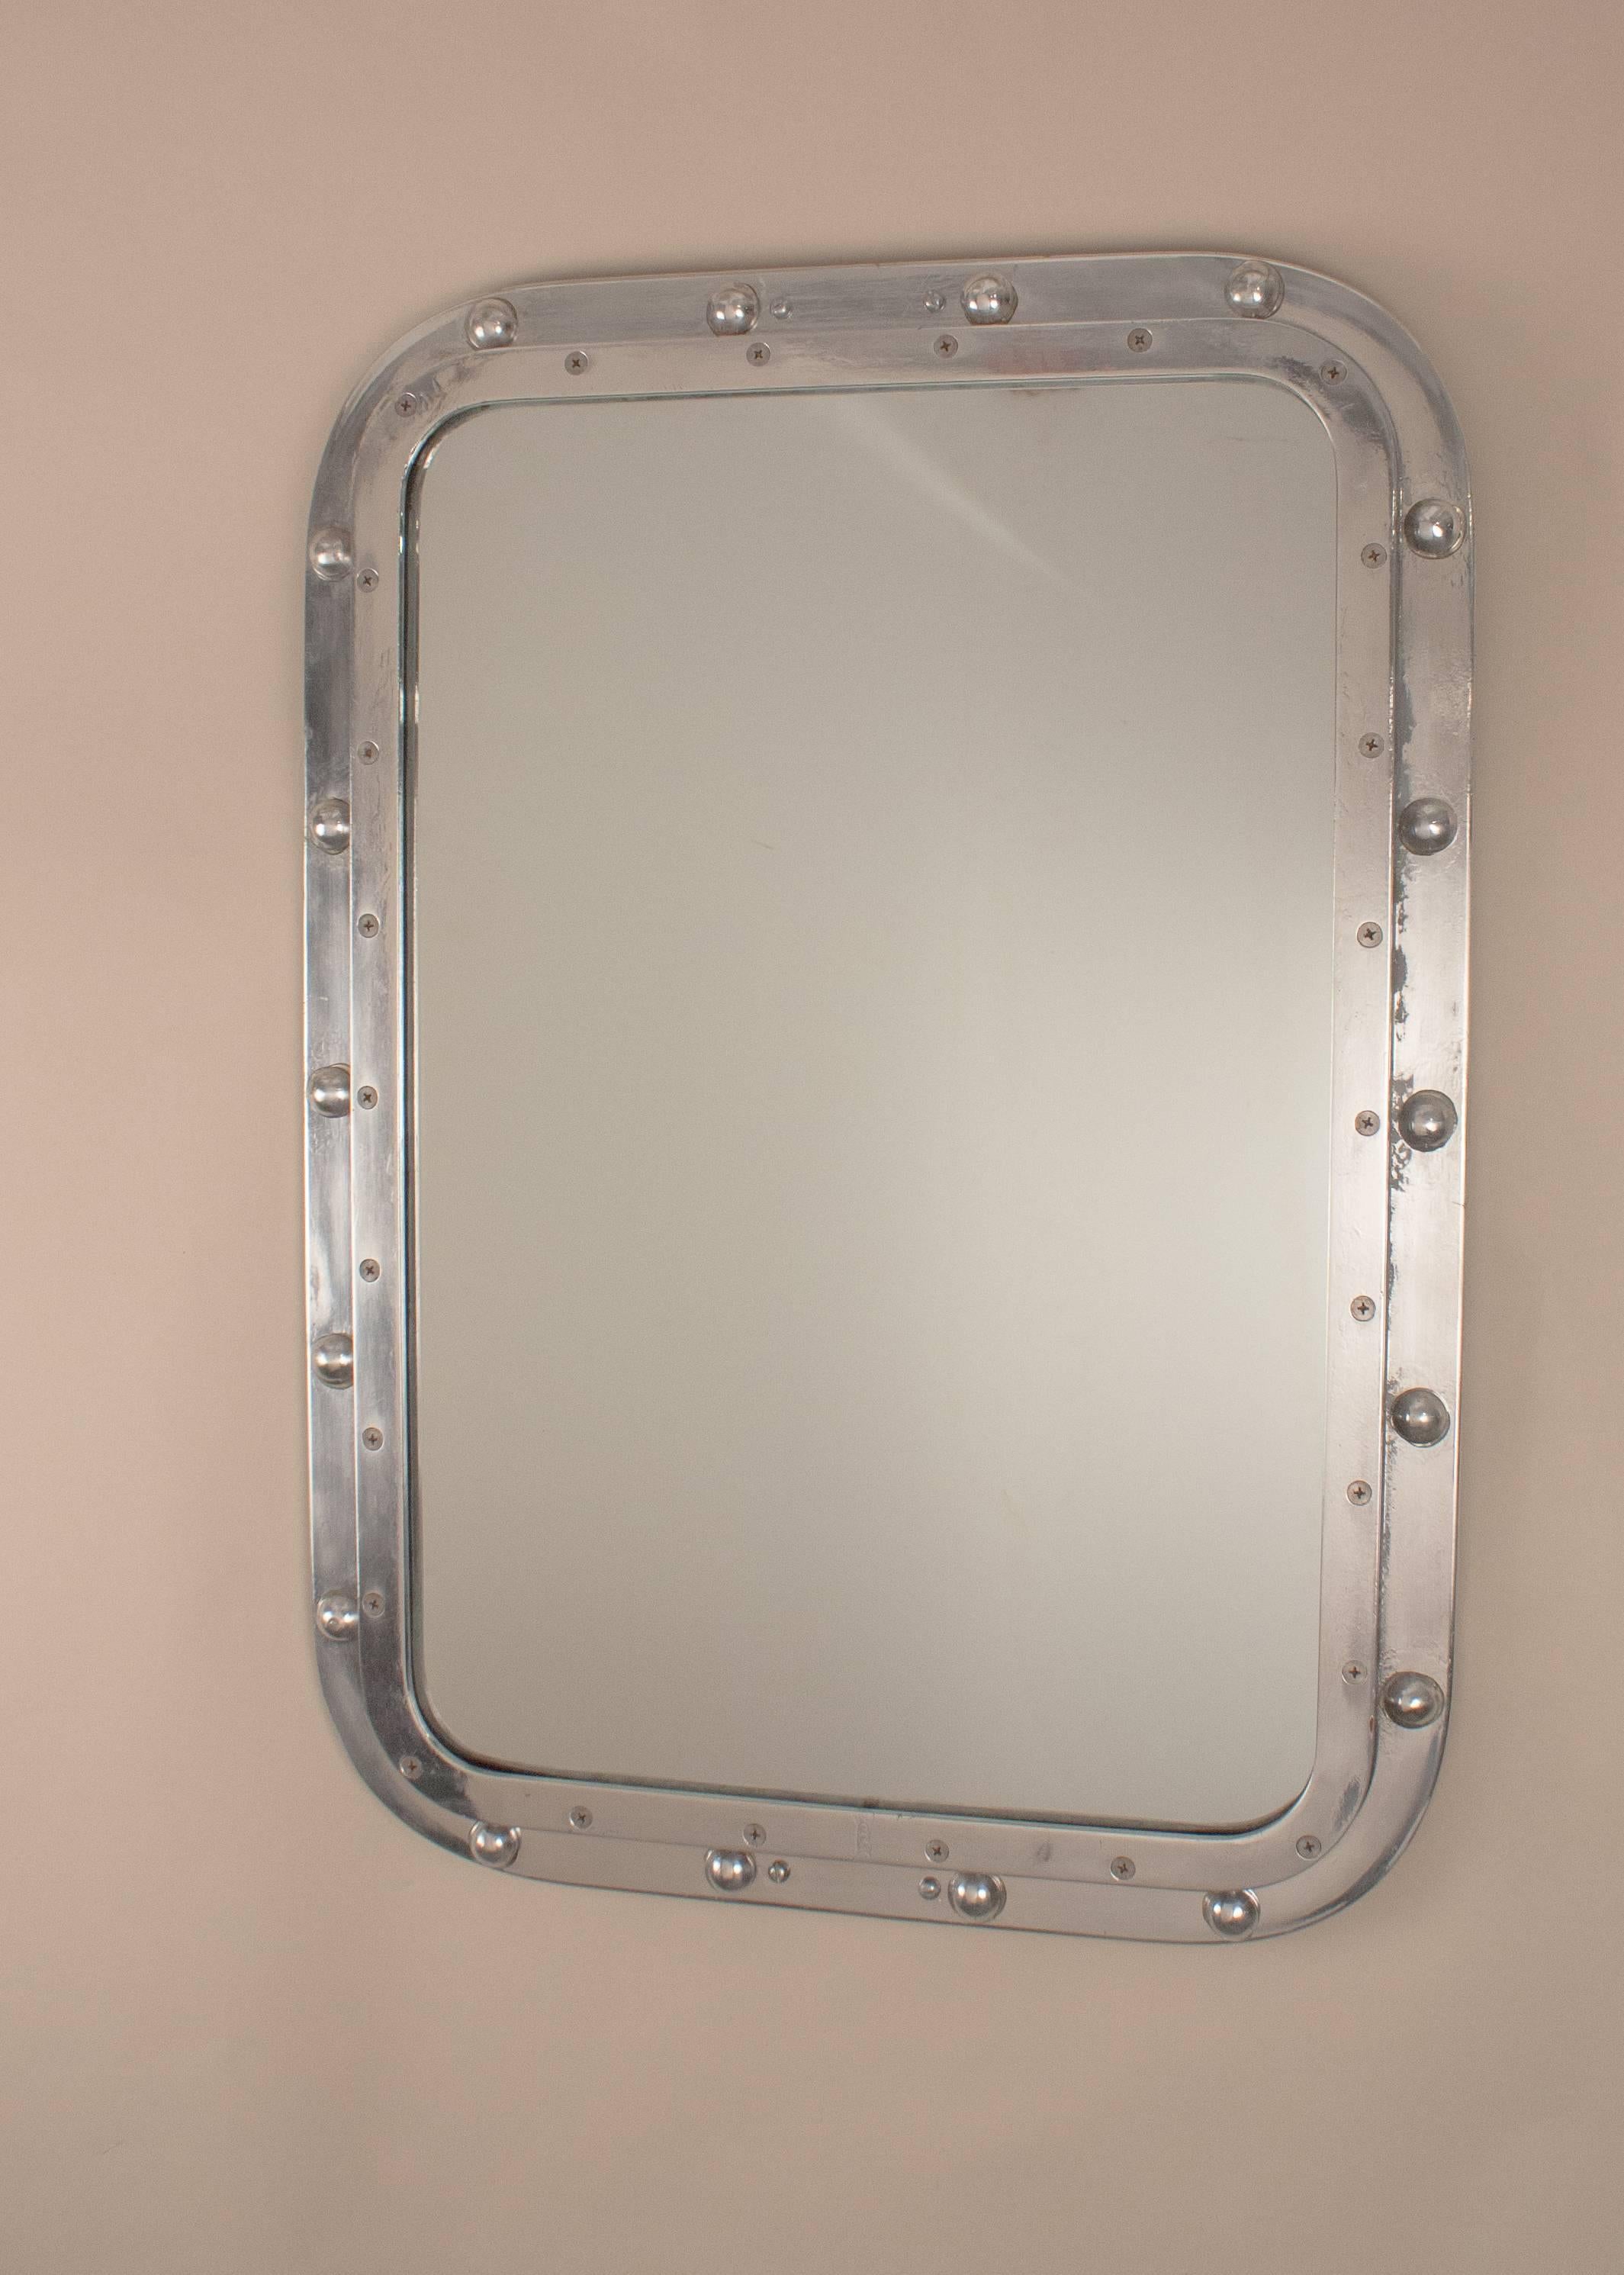 A solid aluminum ship's window wall mirror, circa 1960, that has been salvaged and restored from a mid-century maritime vessel. This rectangular nautical mirror has its original circular rivets and screws. It has a clean, modern, industrial